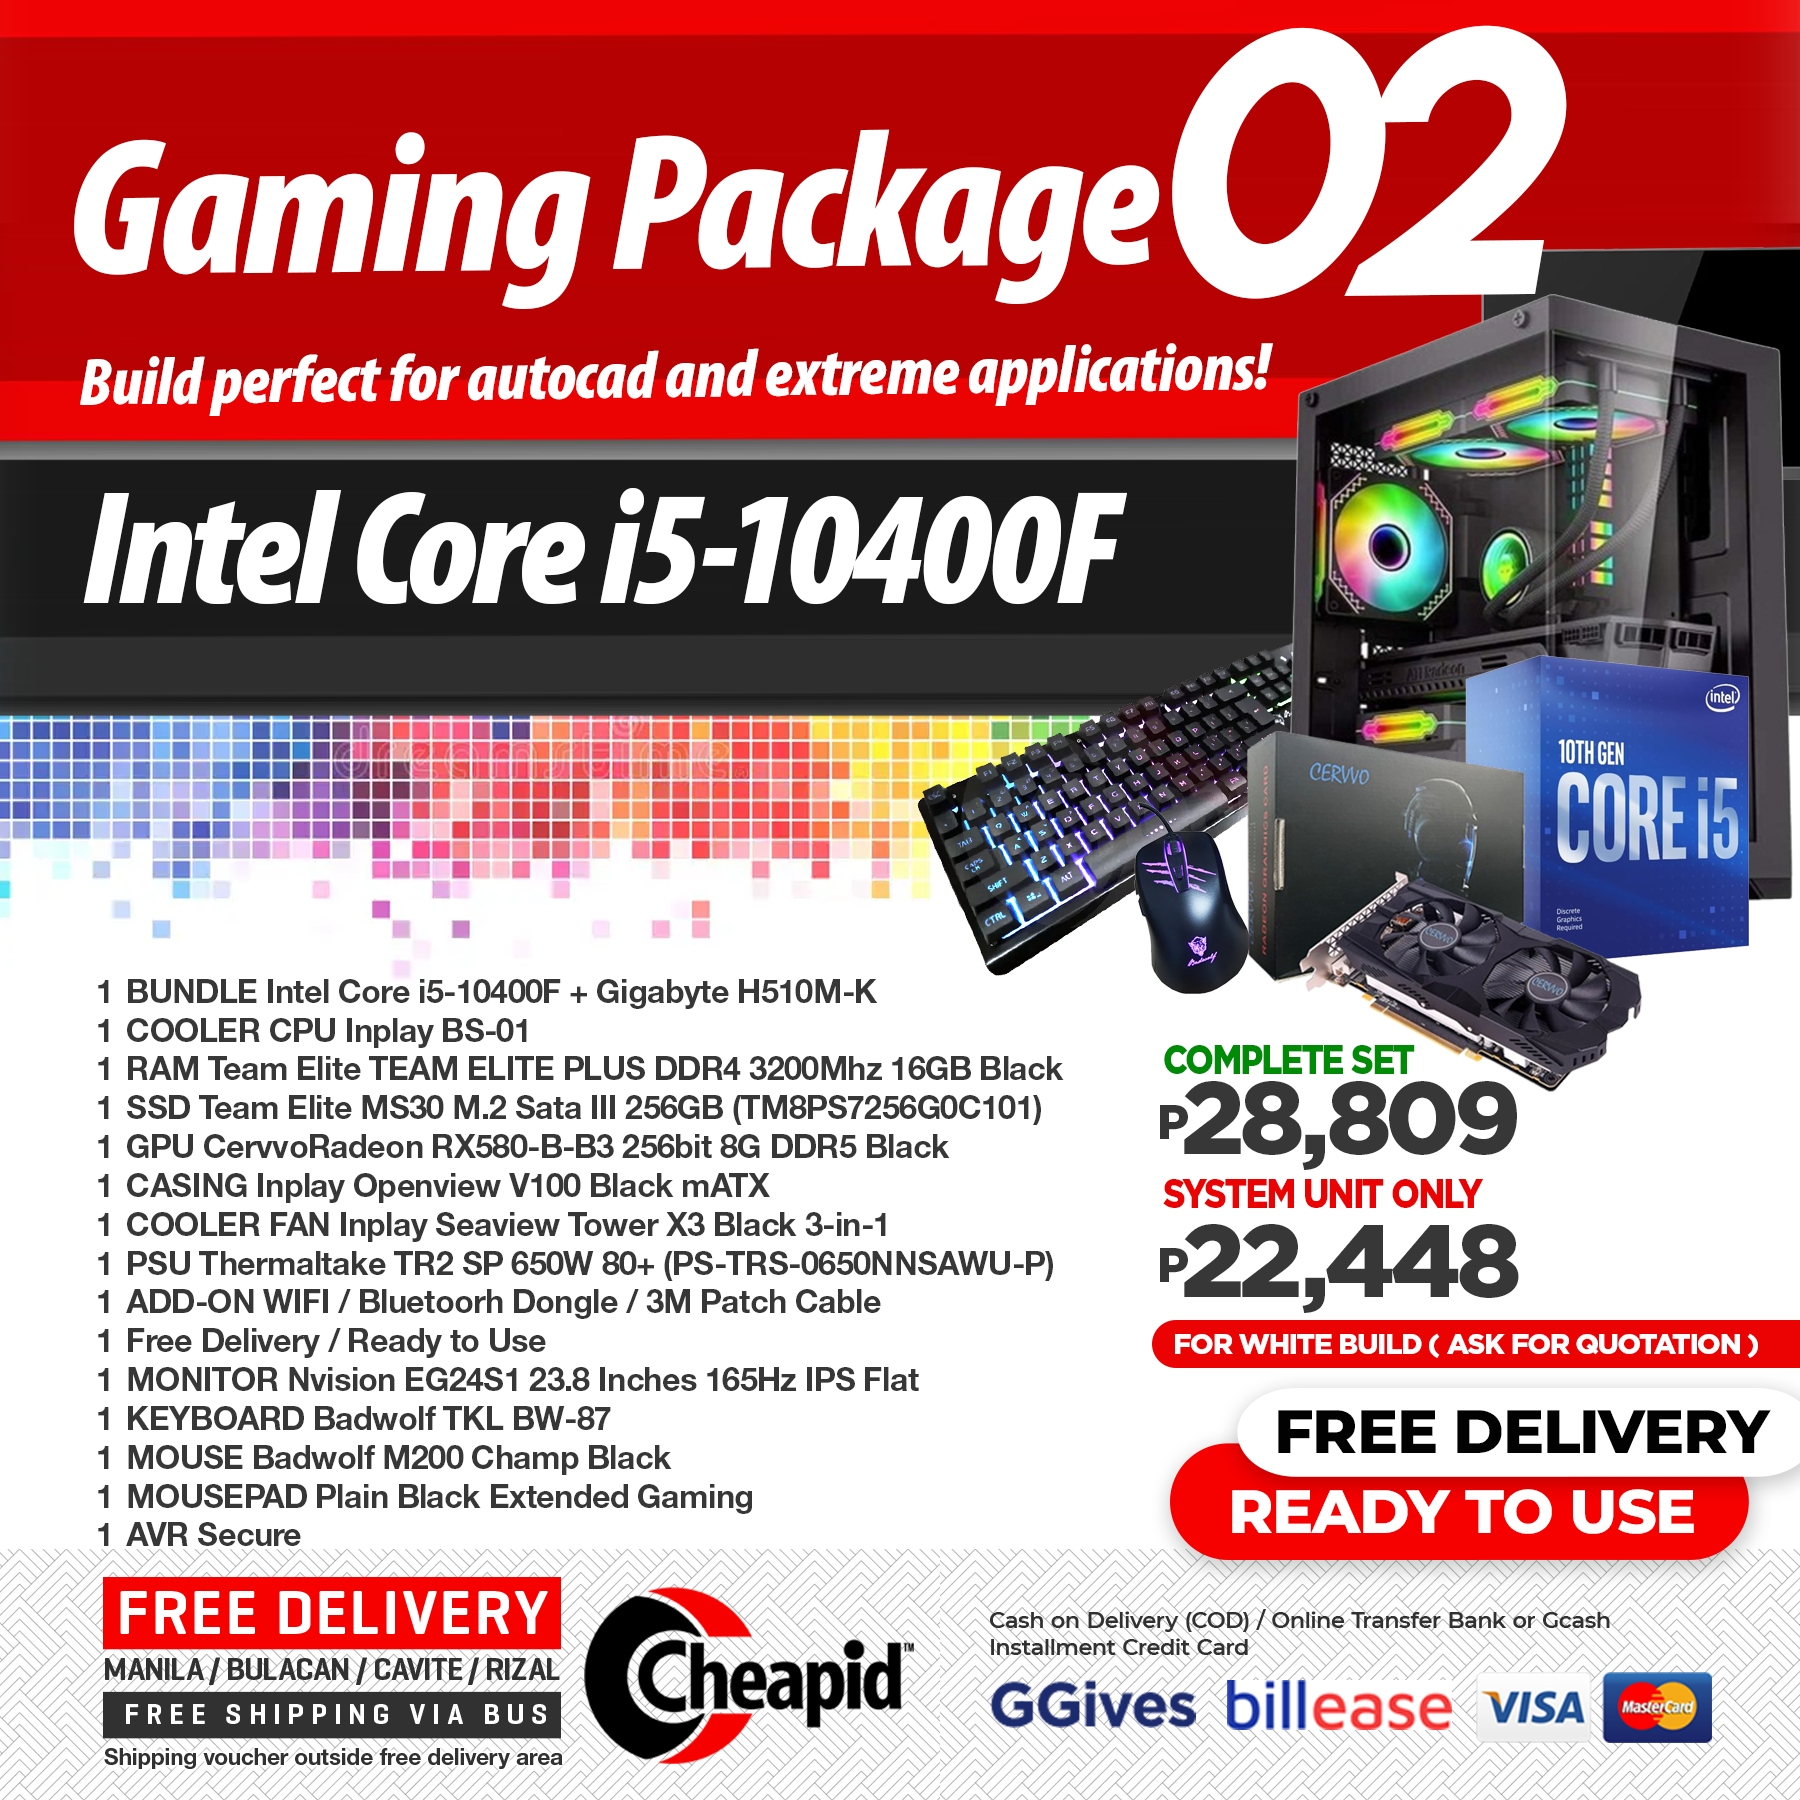 Cheapid Gaming Package - Setup 02